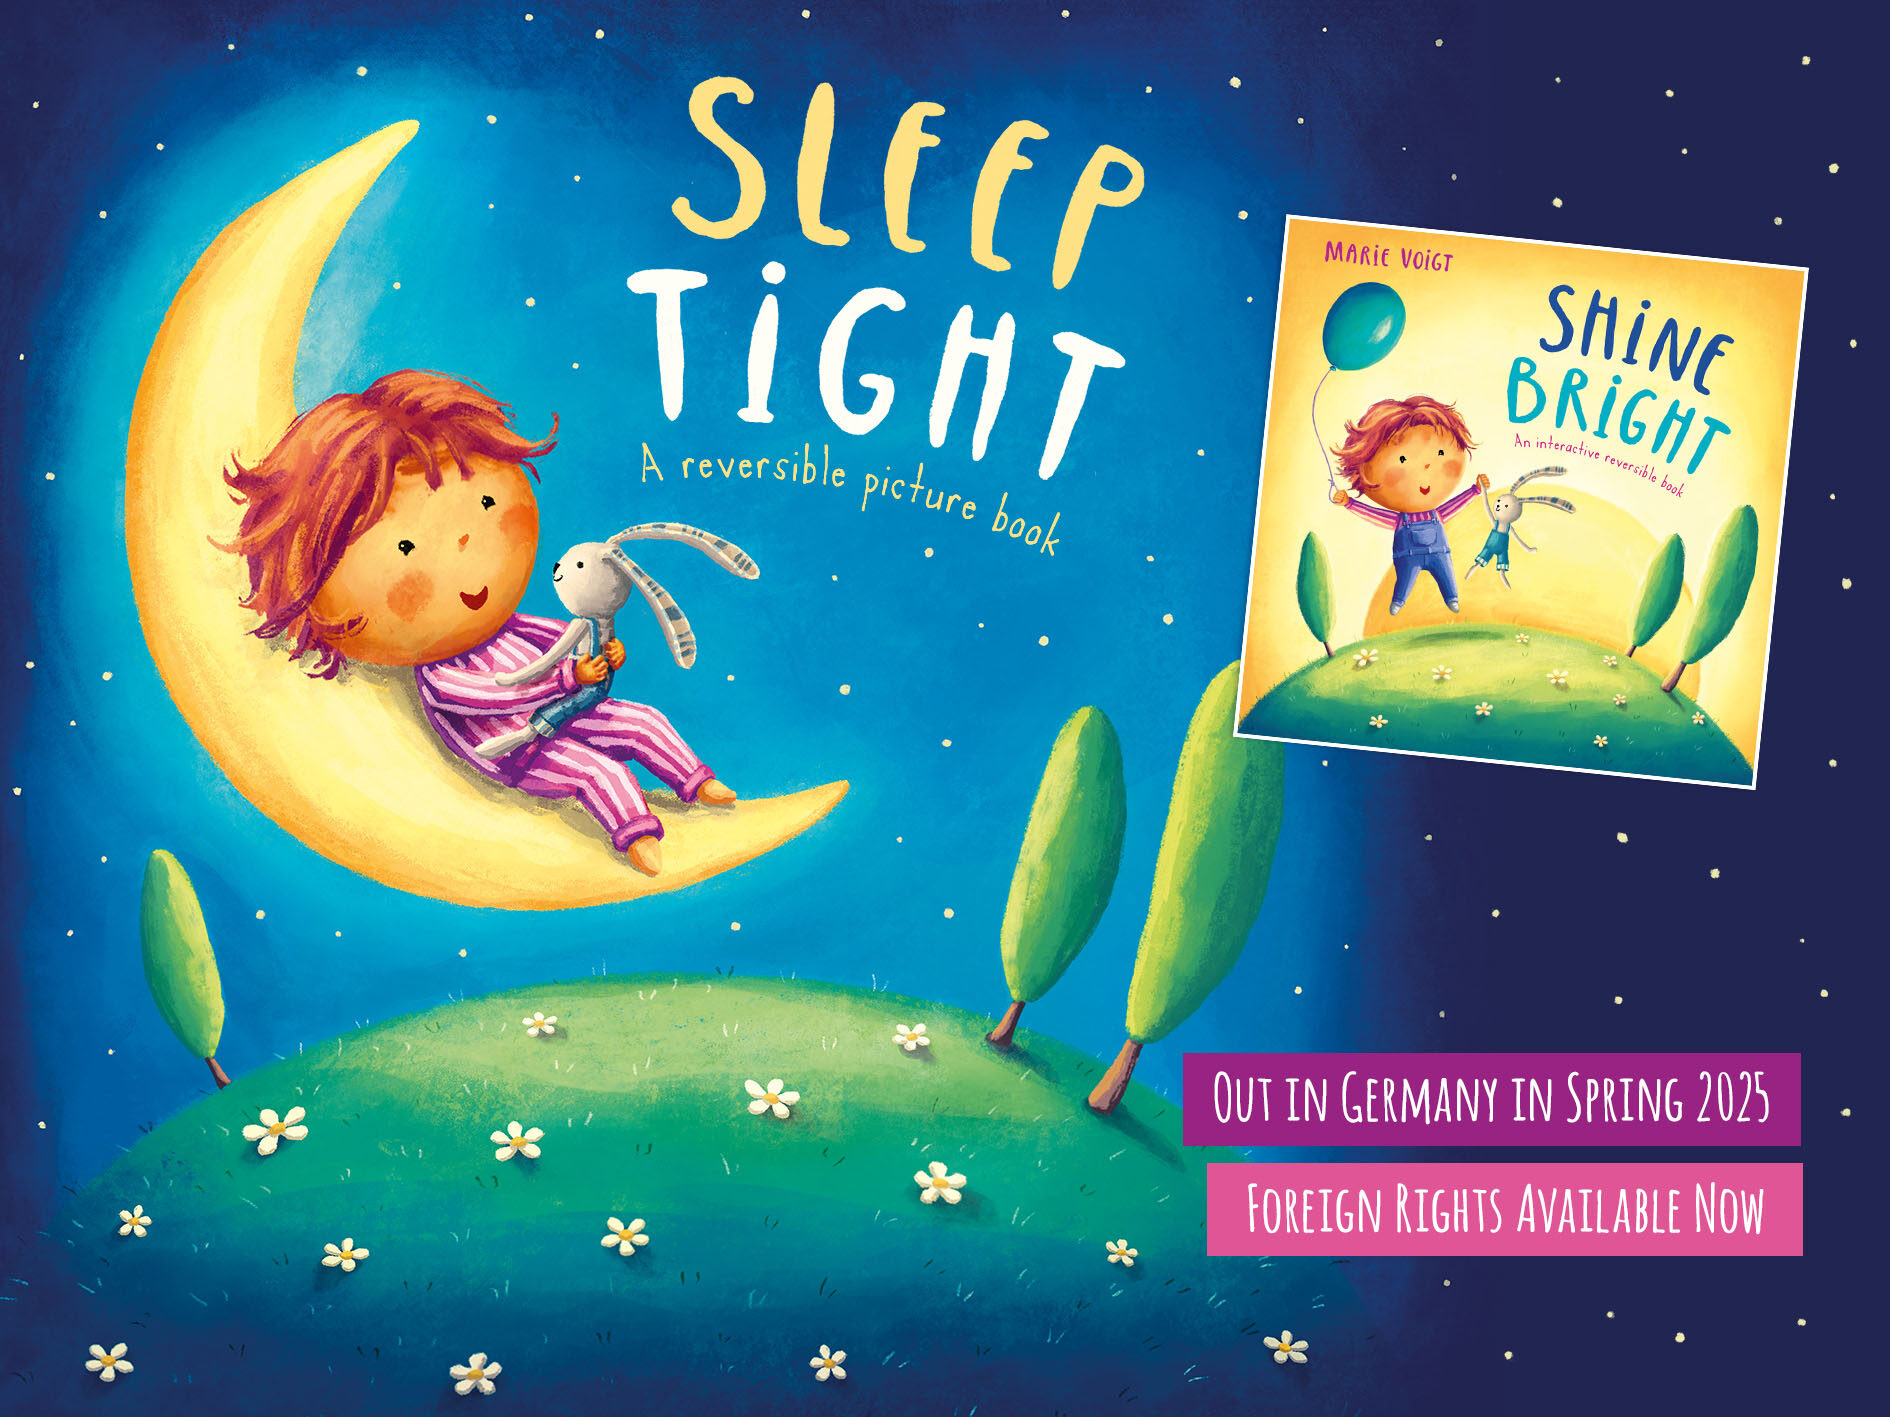 Sleep Tight Shine Bright - New reversible picture book by Marie Voigt